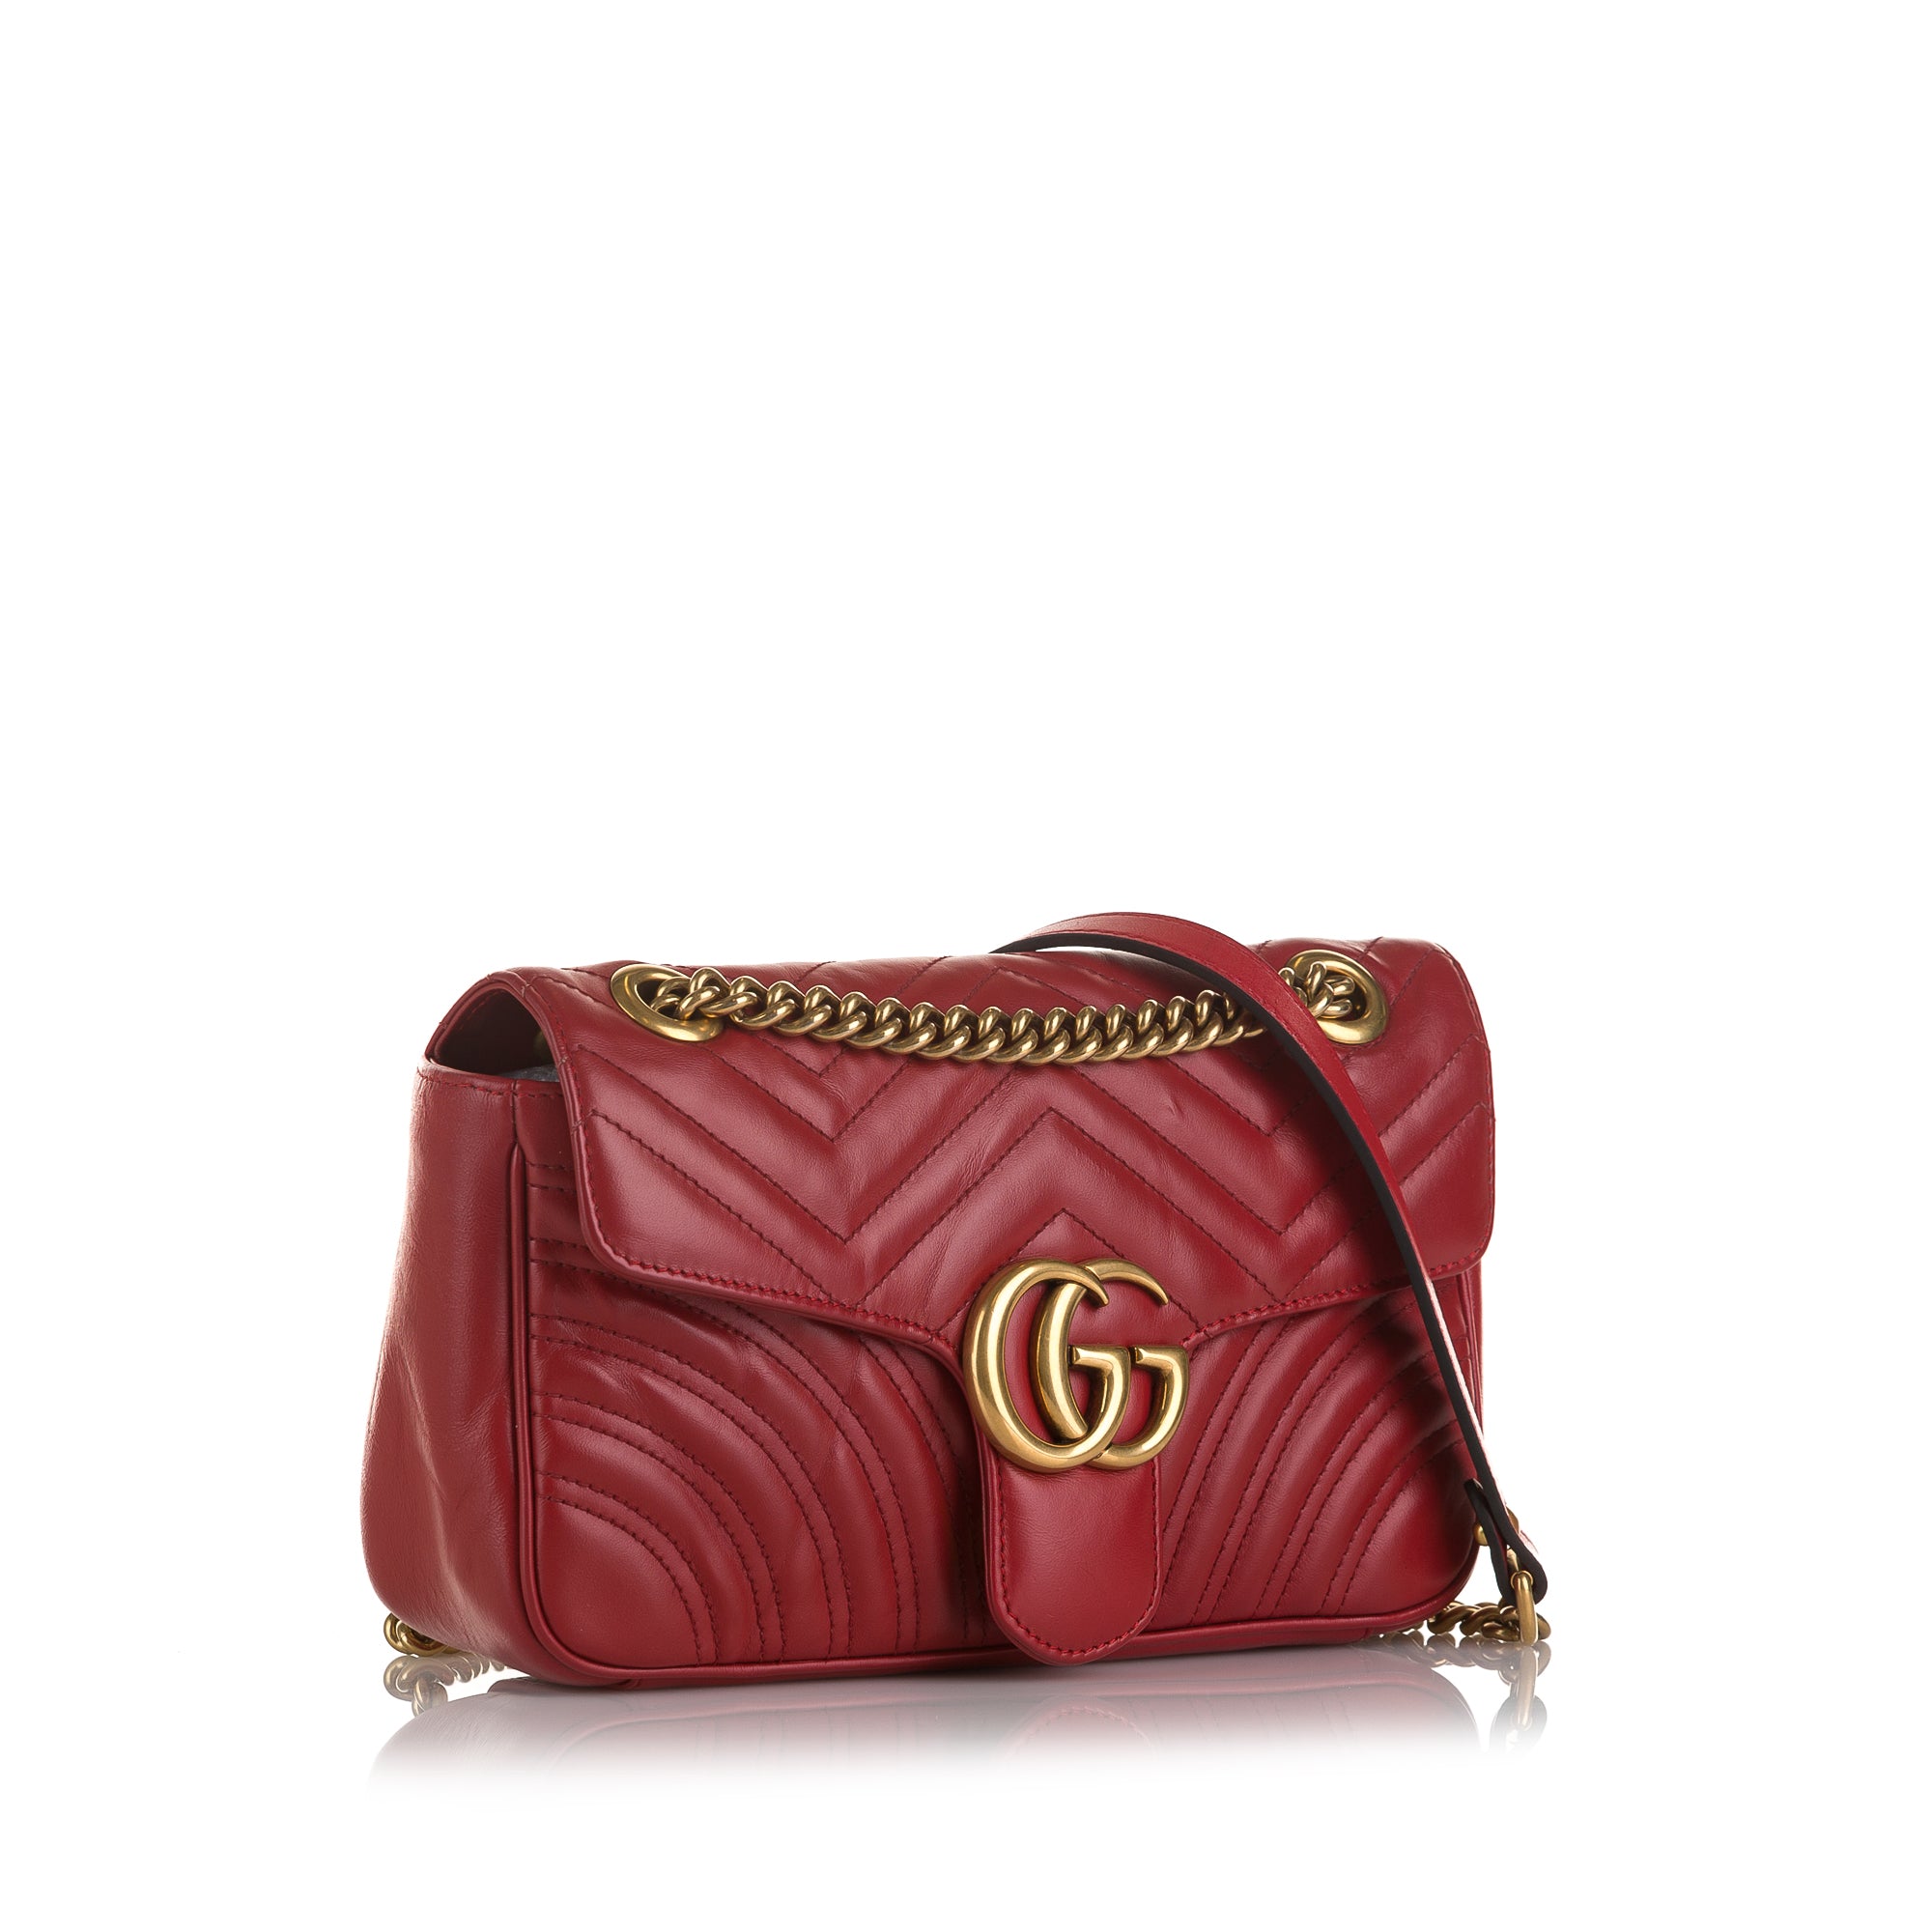 GG Marmont mini shoulder bag in red leather